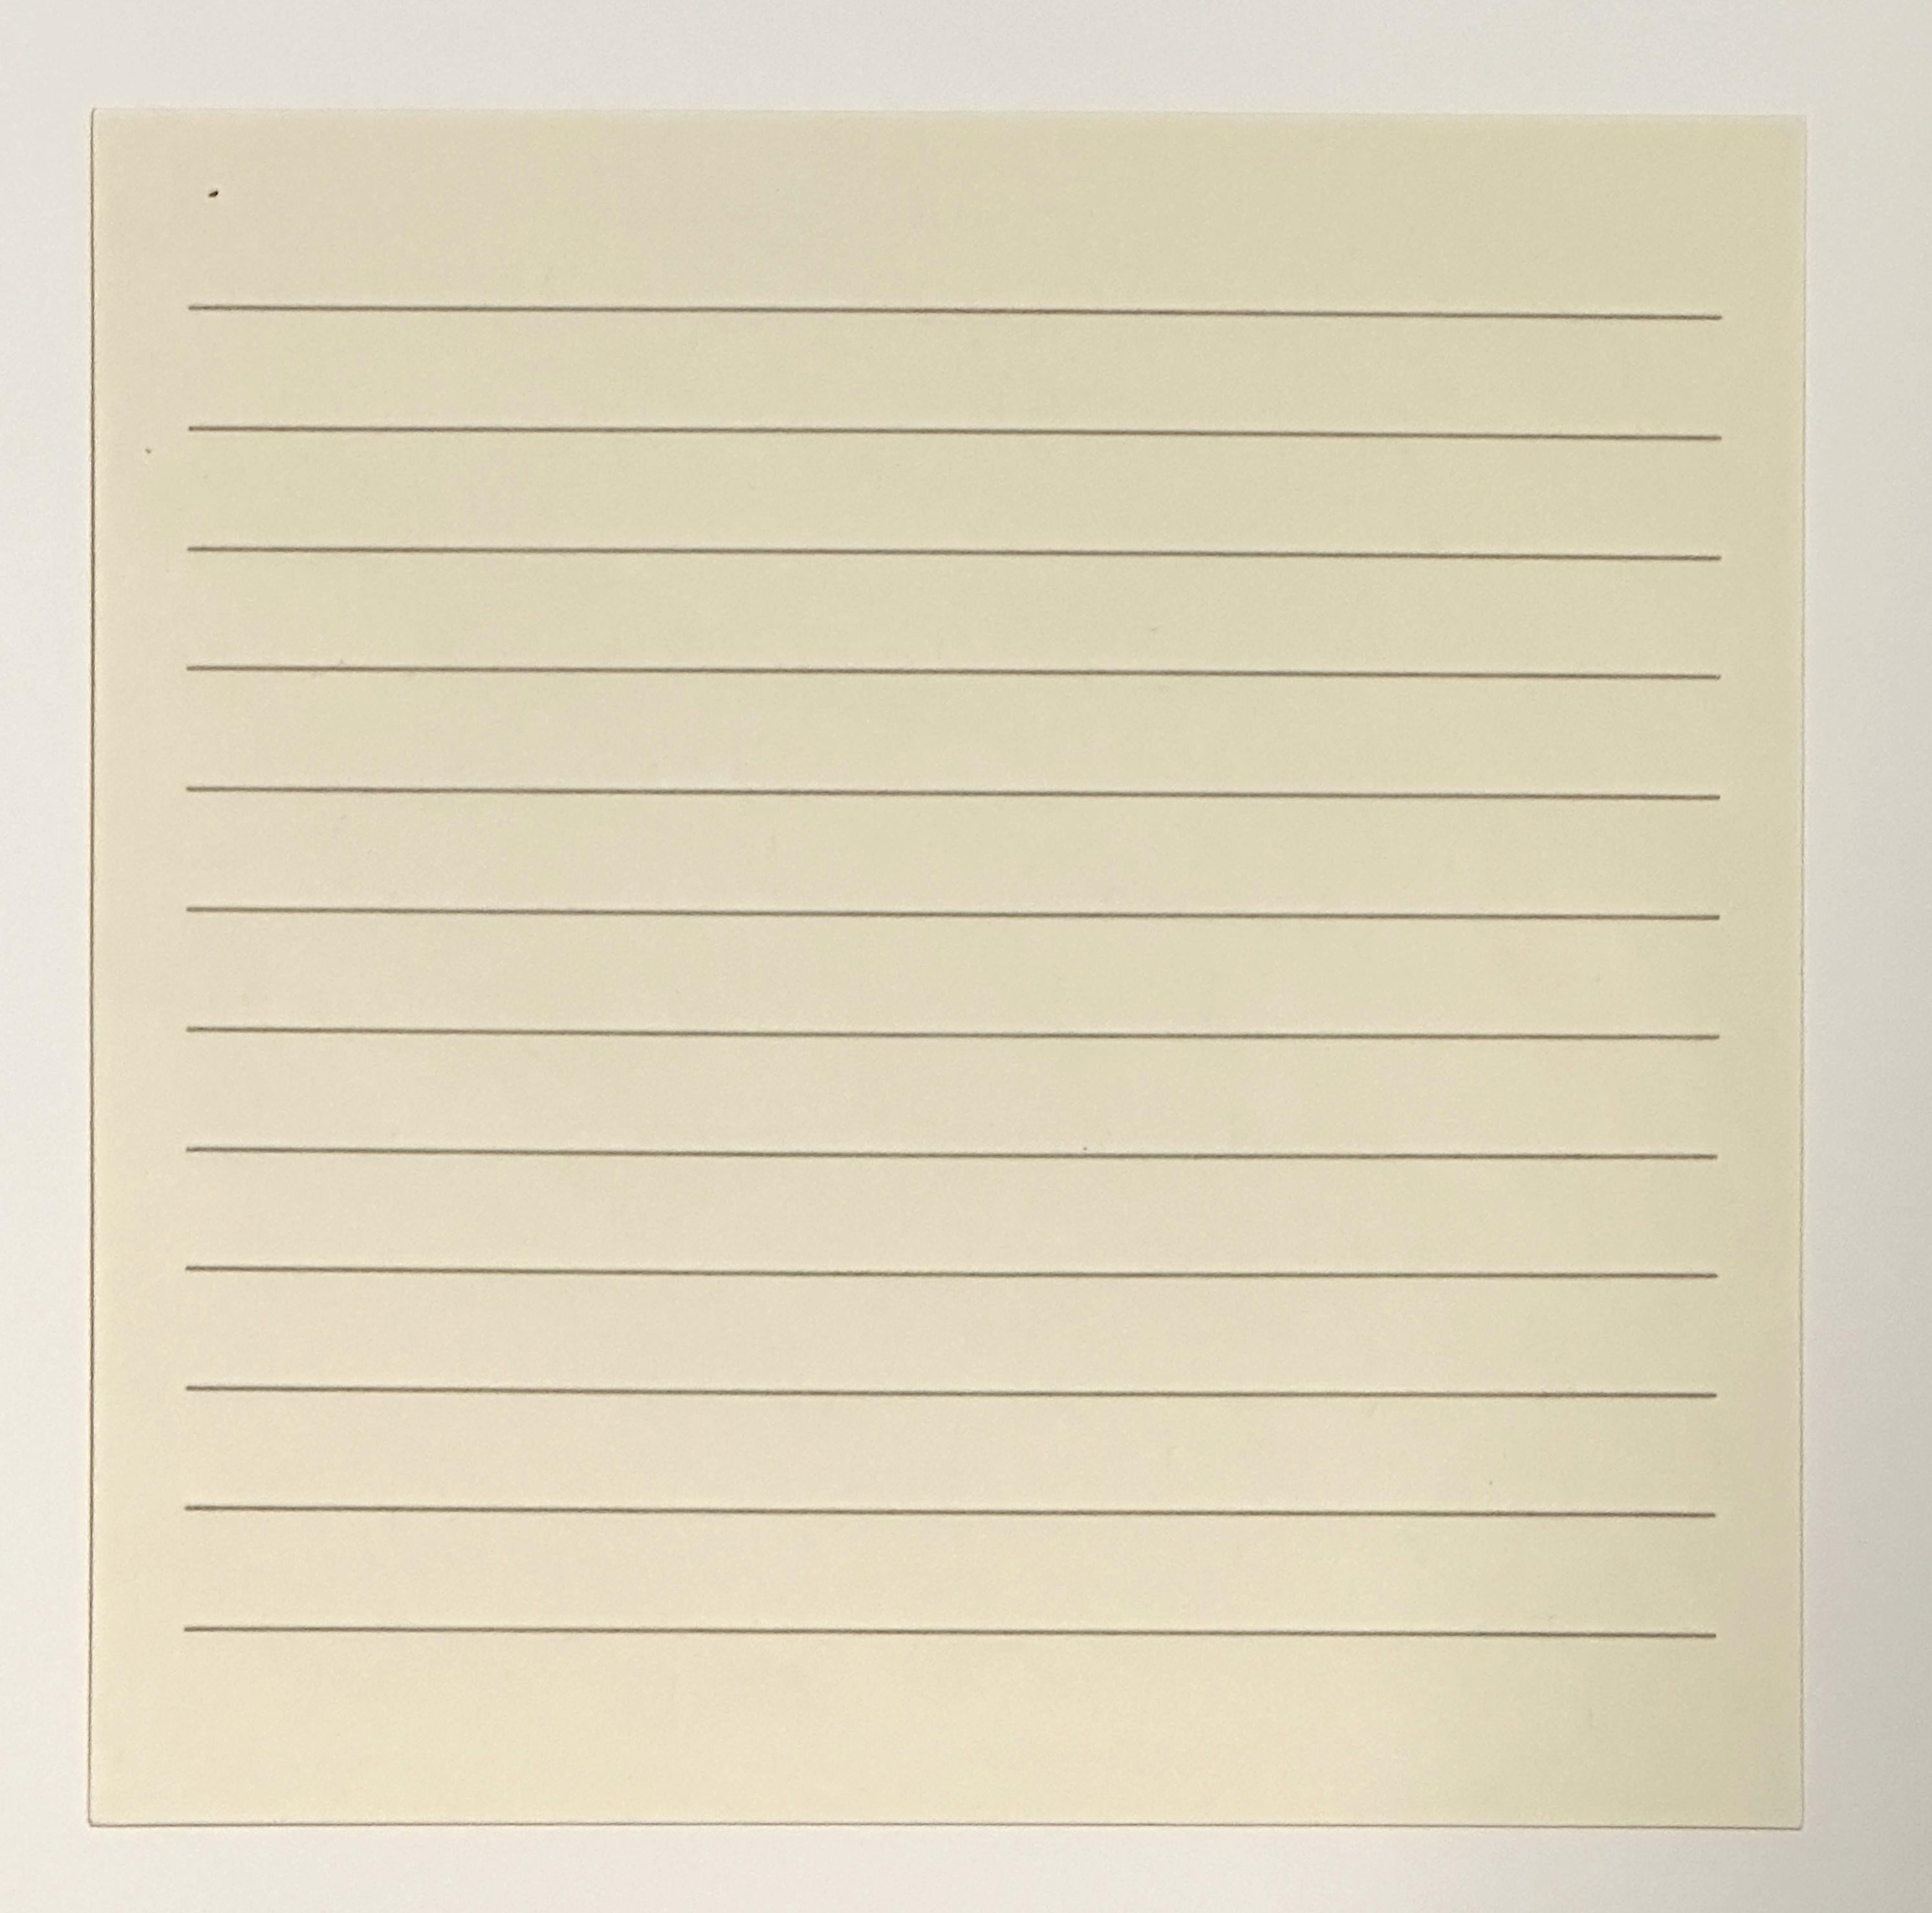 agnes martin on a clear day